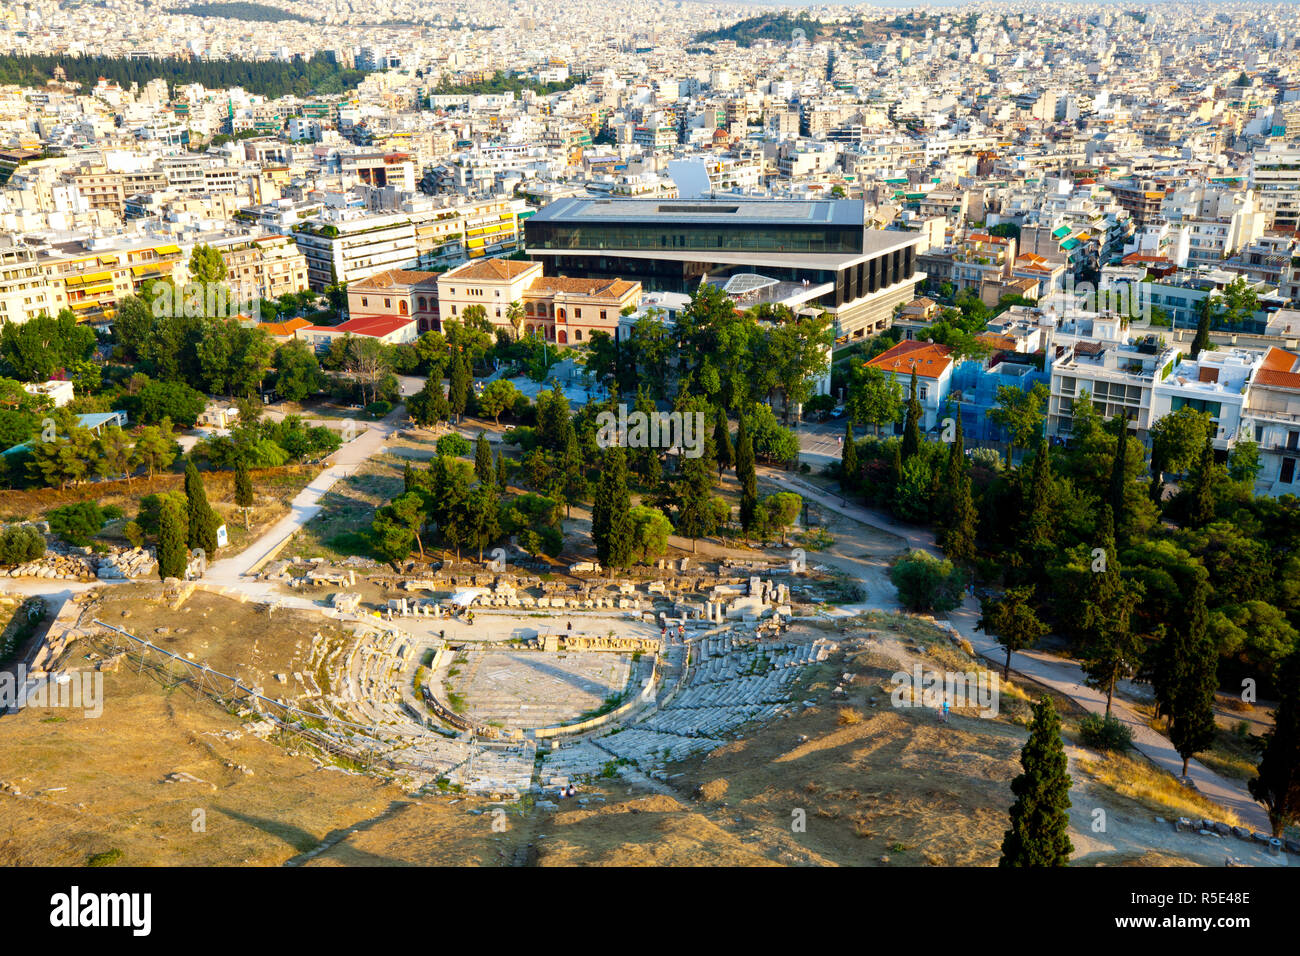 New Acropplis Museum & City Overview from the Acropolis, Plaka, Athens, Greece Stock Photo